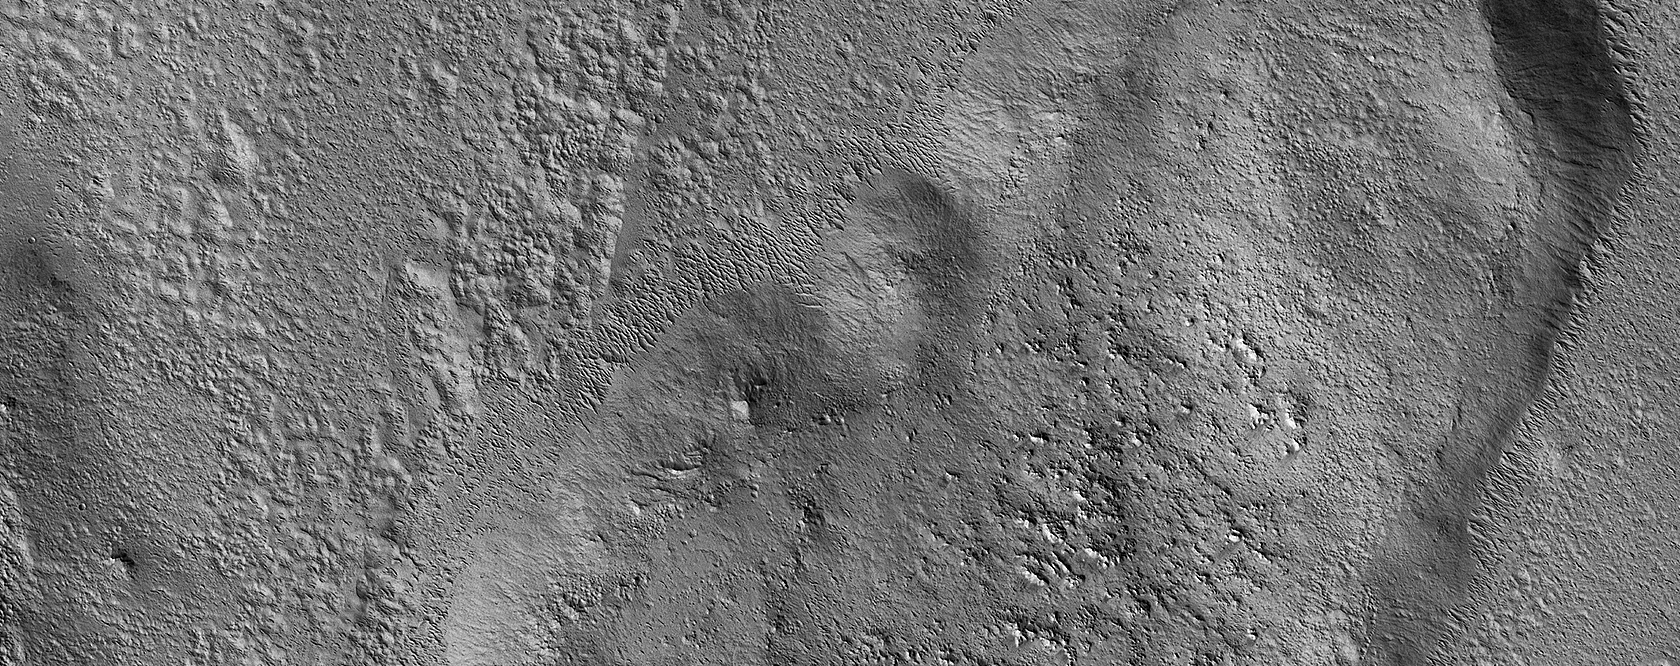 Tooting Crater Ejecta